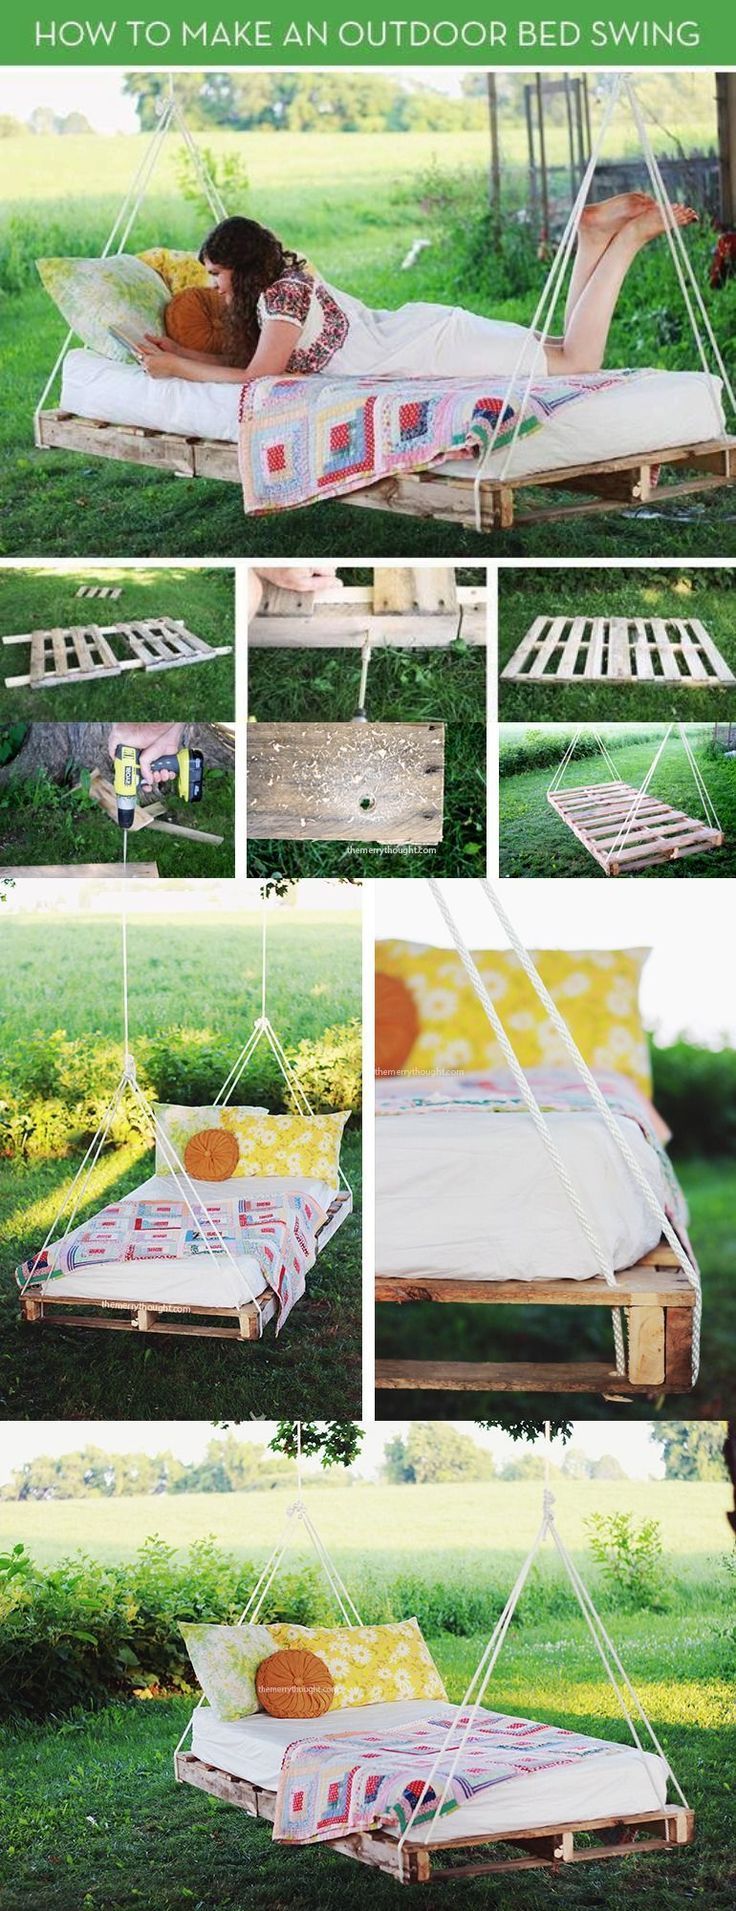 12 DIY Pallet Projects for Your Home Improvement -   13 diy projects Tumblr facebook ideas